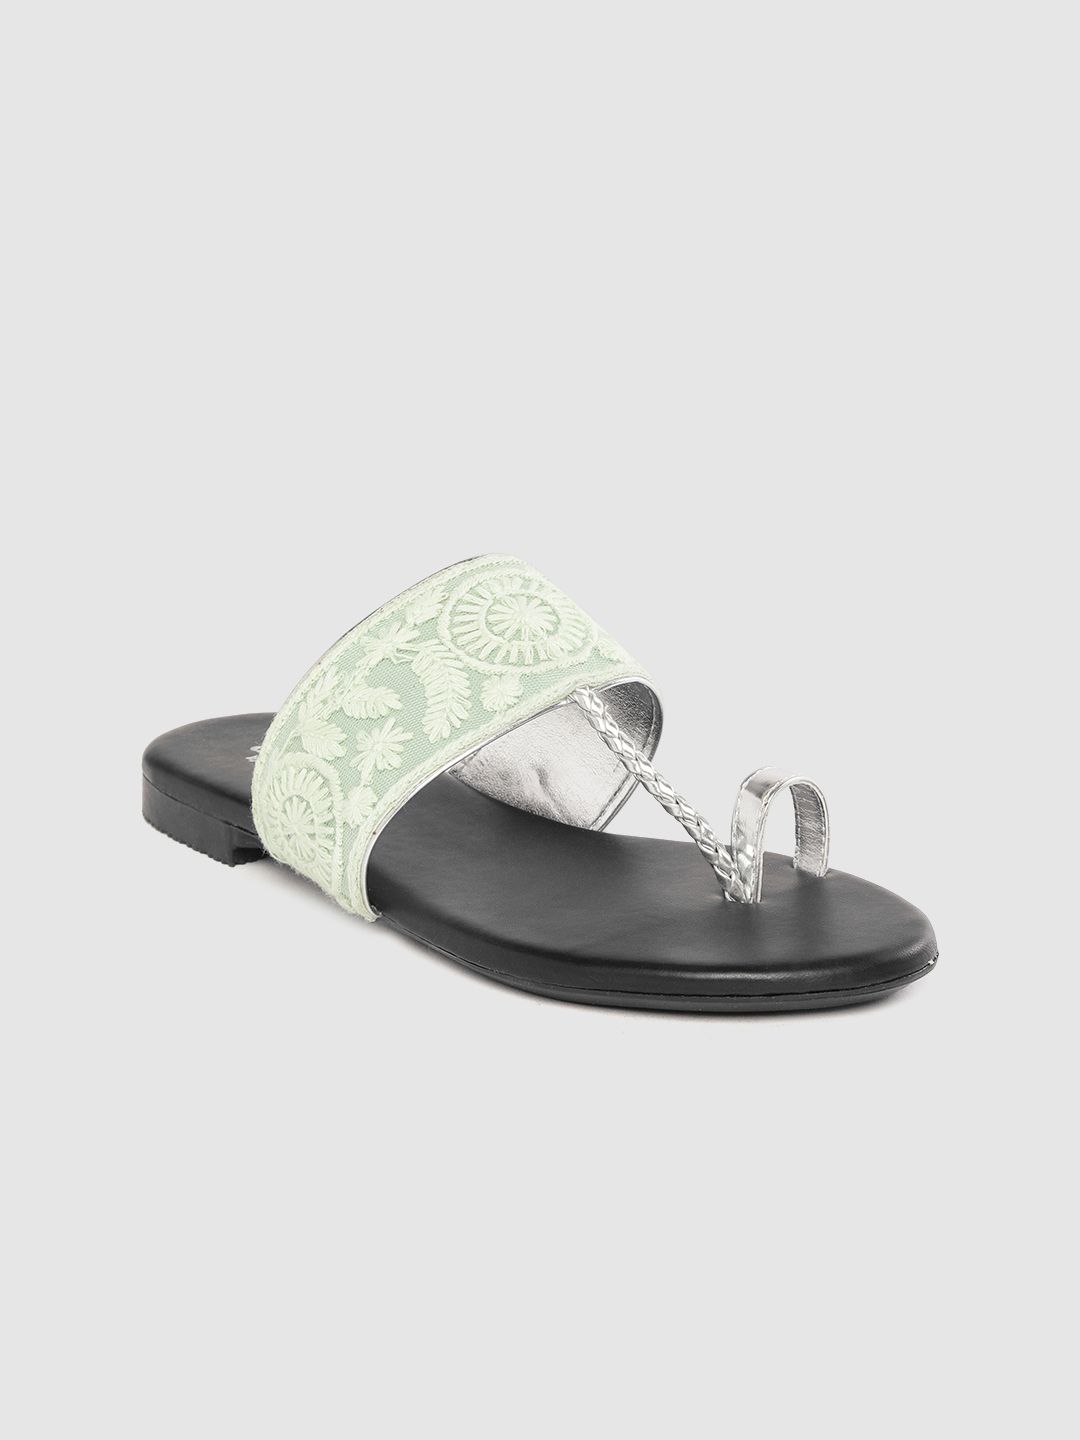 Anouk Women Mint Green & Silver-Toned Embroidery One-Toe Ethnic T-Strap Flats Price in India